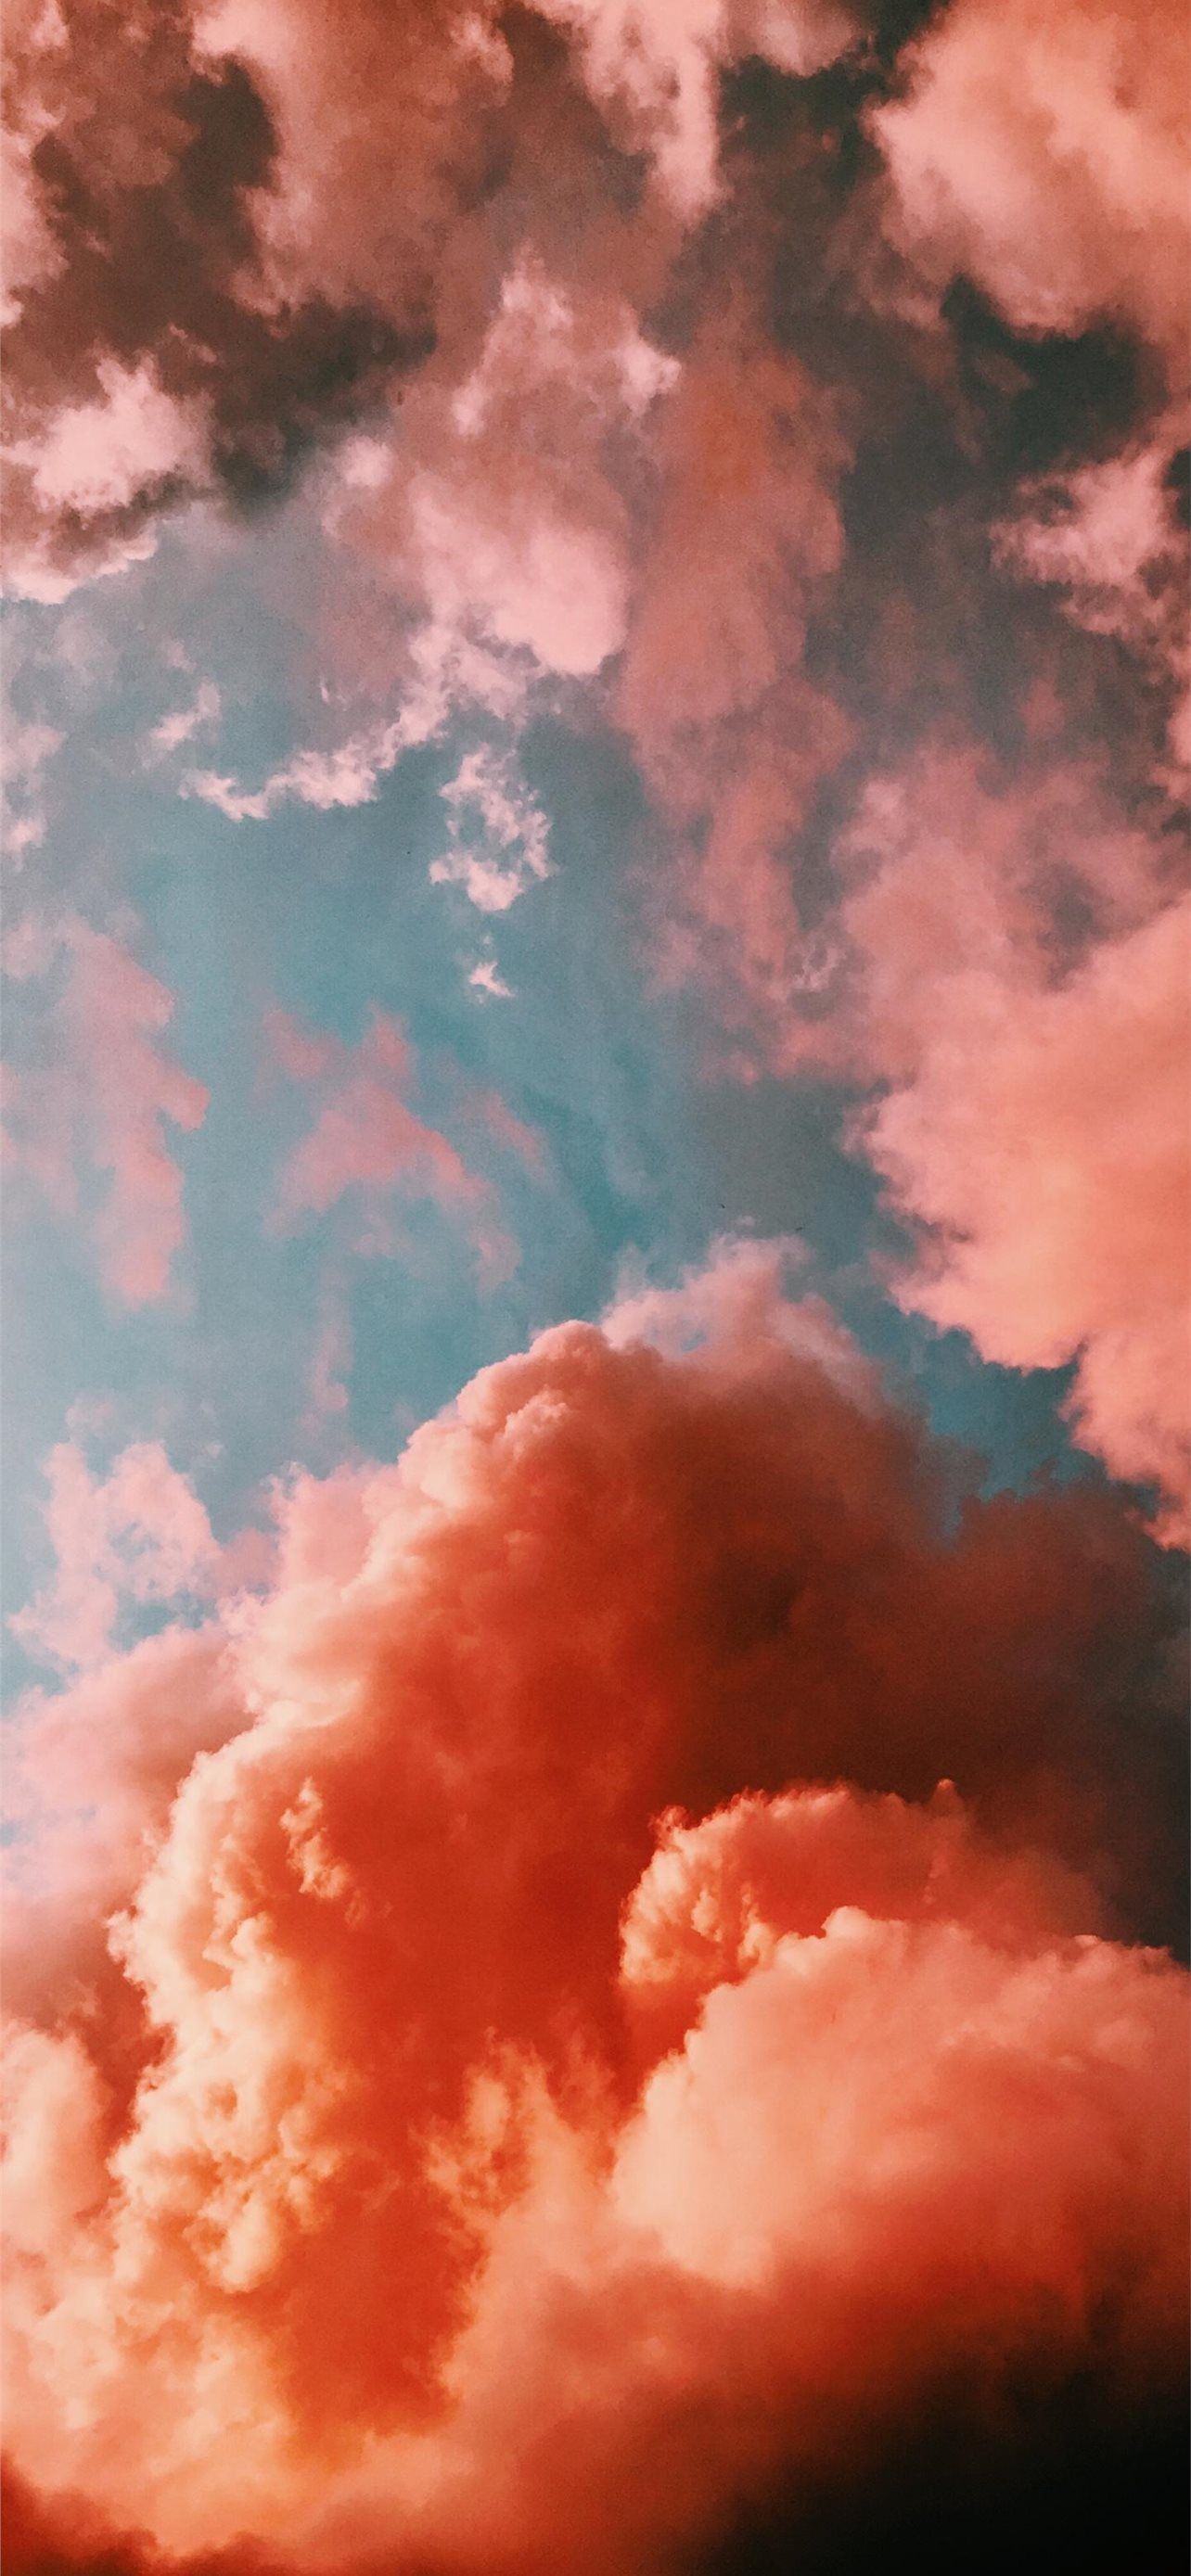 Aesthetic Clouds iPhone Wallpaper with high-resolution 1125x2436 pixel. You can use this wallpaper for your iPhone 5, 6, 7, 8, X, XS, XR backgrounds, Mobile Screensaver, or iPad Lock Screen - Coral